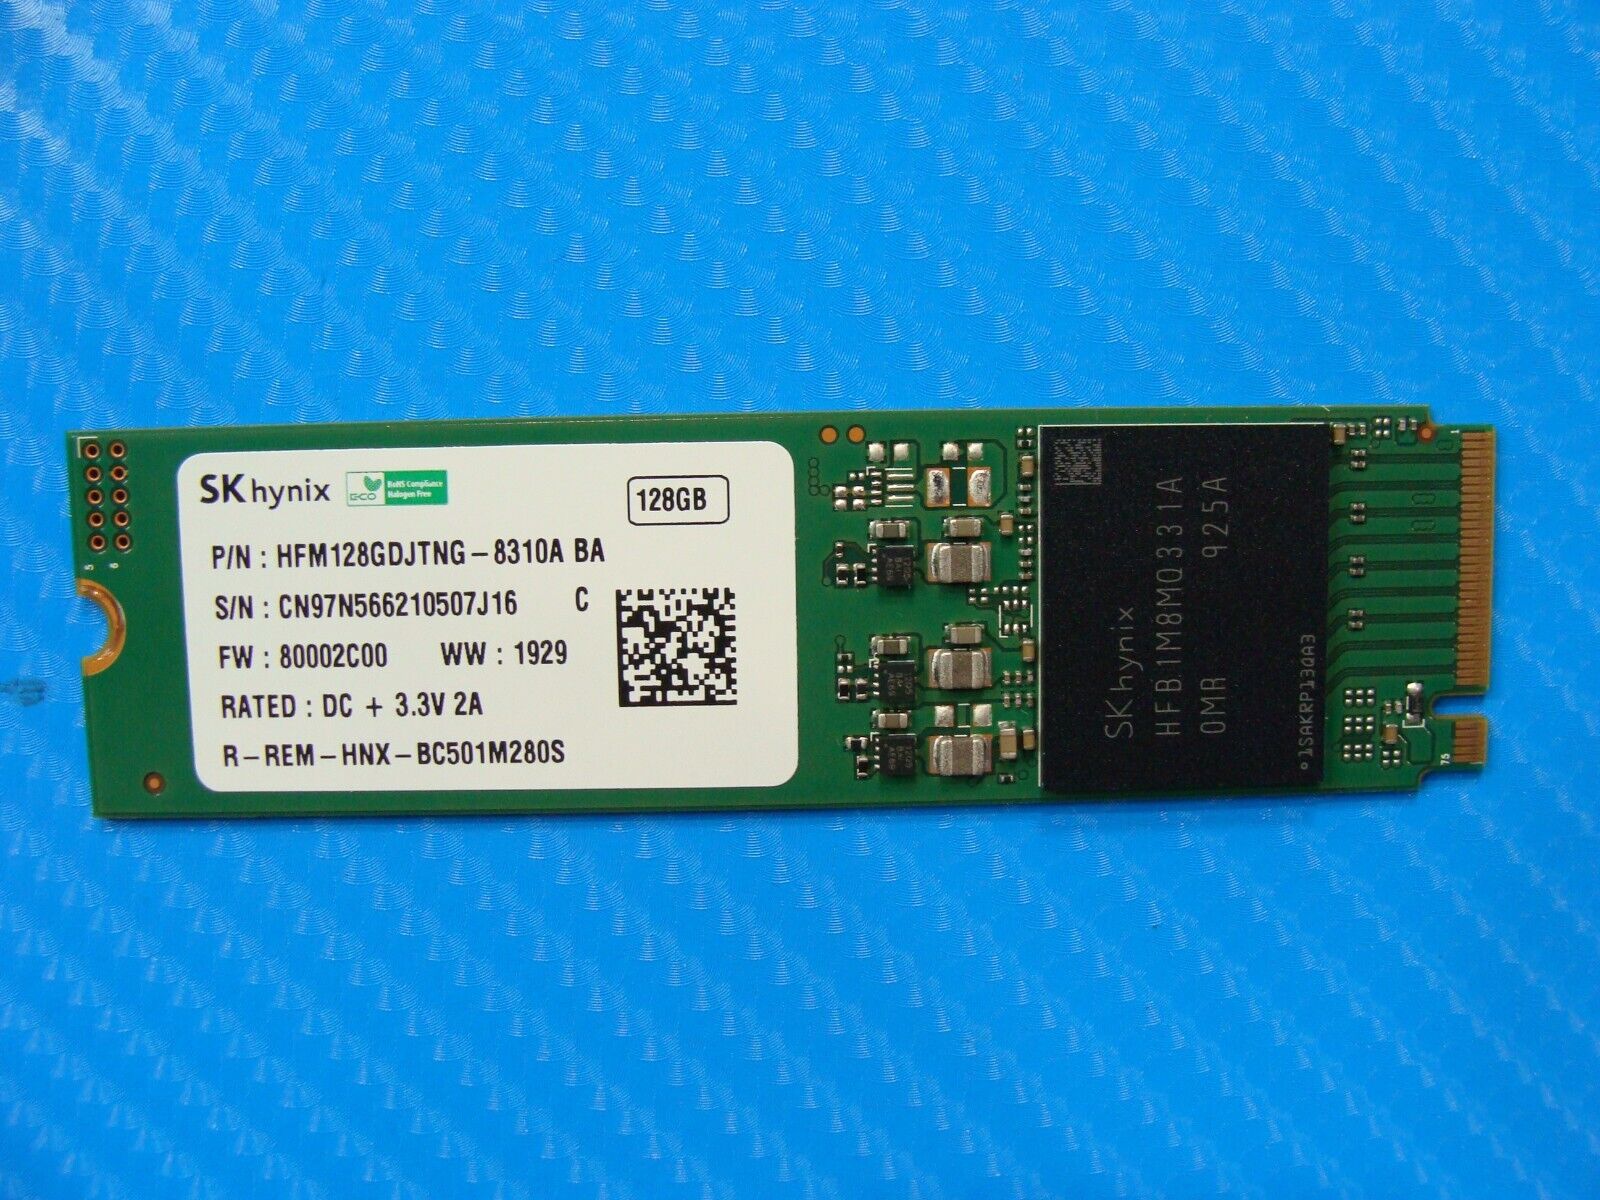 Acer A515-43-R19L SK Hynix 128GB M.2 NVMe Solid State Drive HFM128GDJTNG-8310A